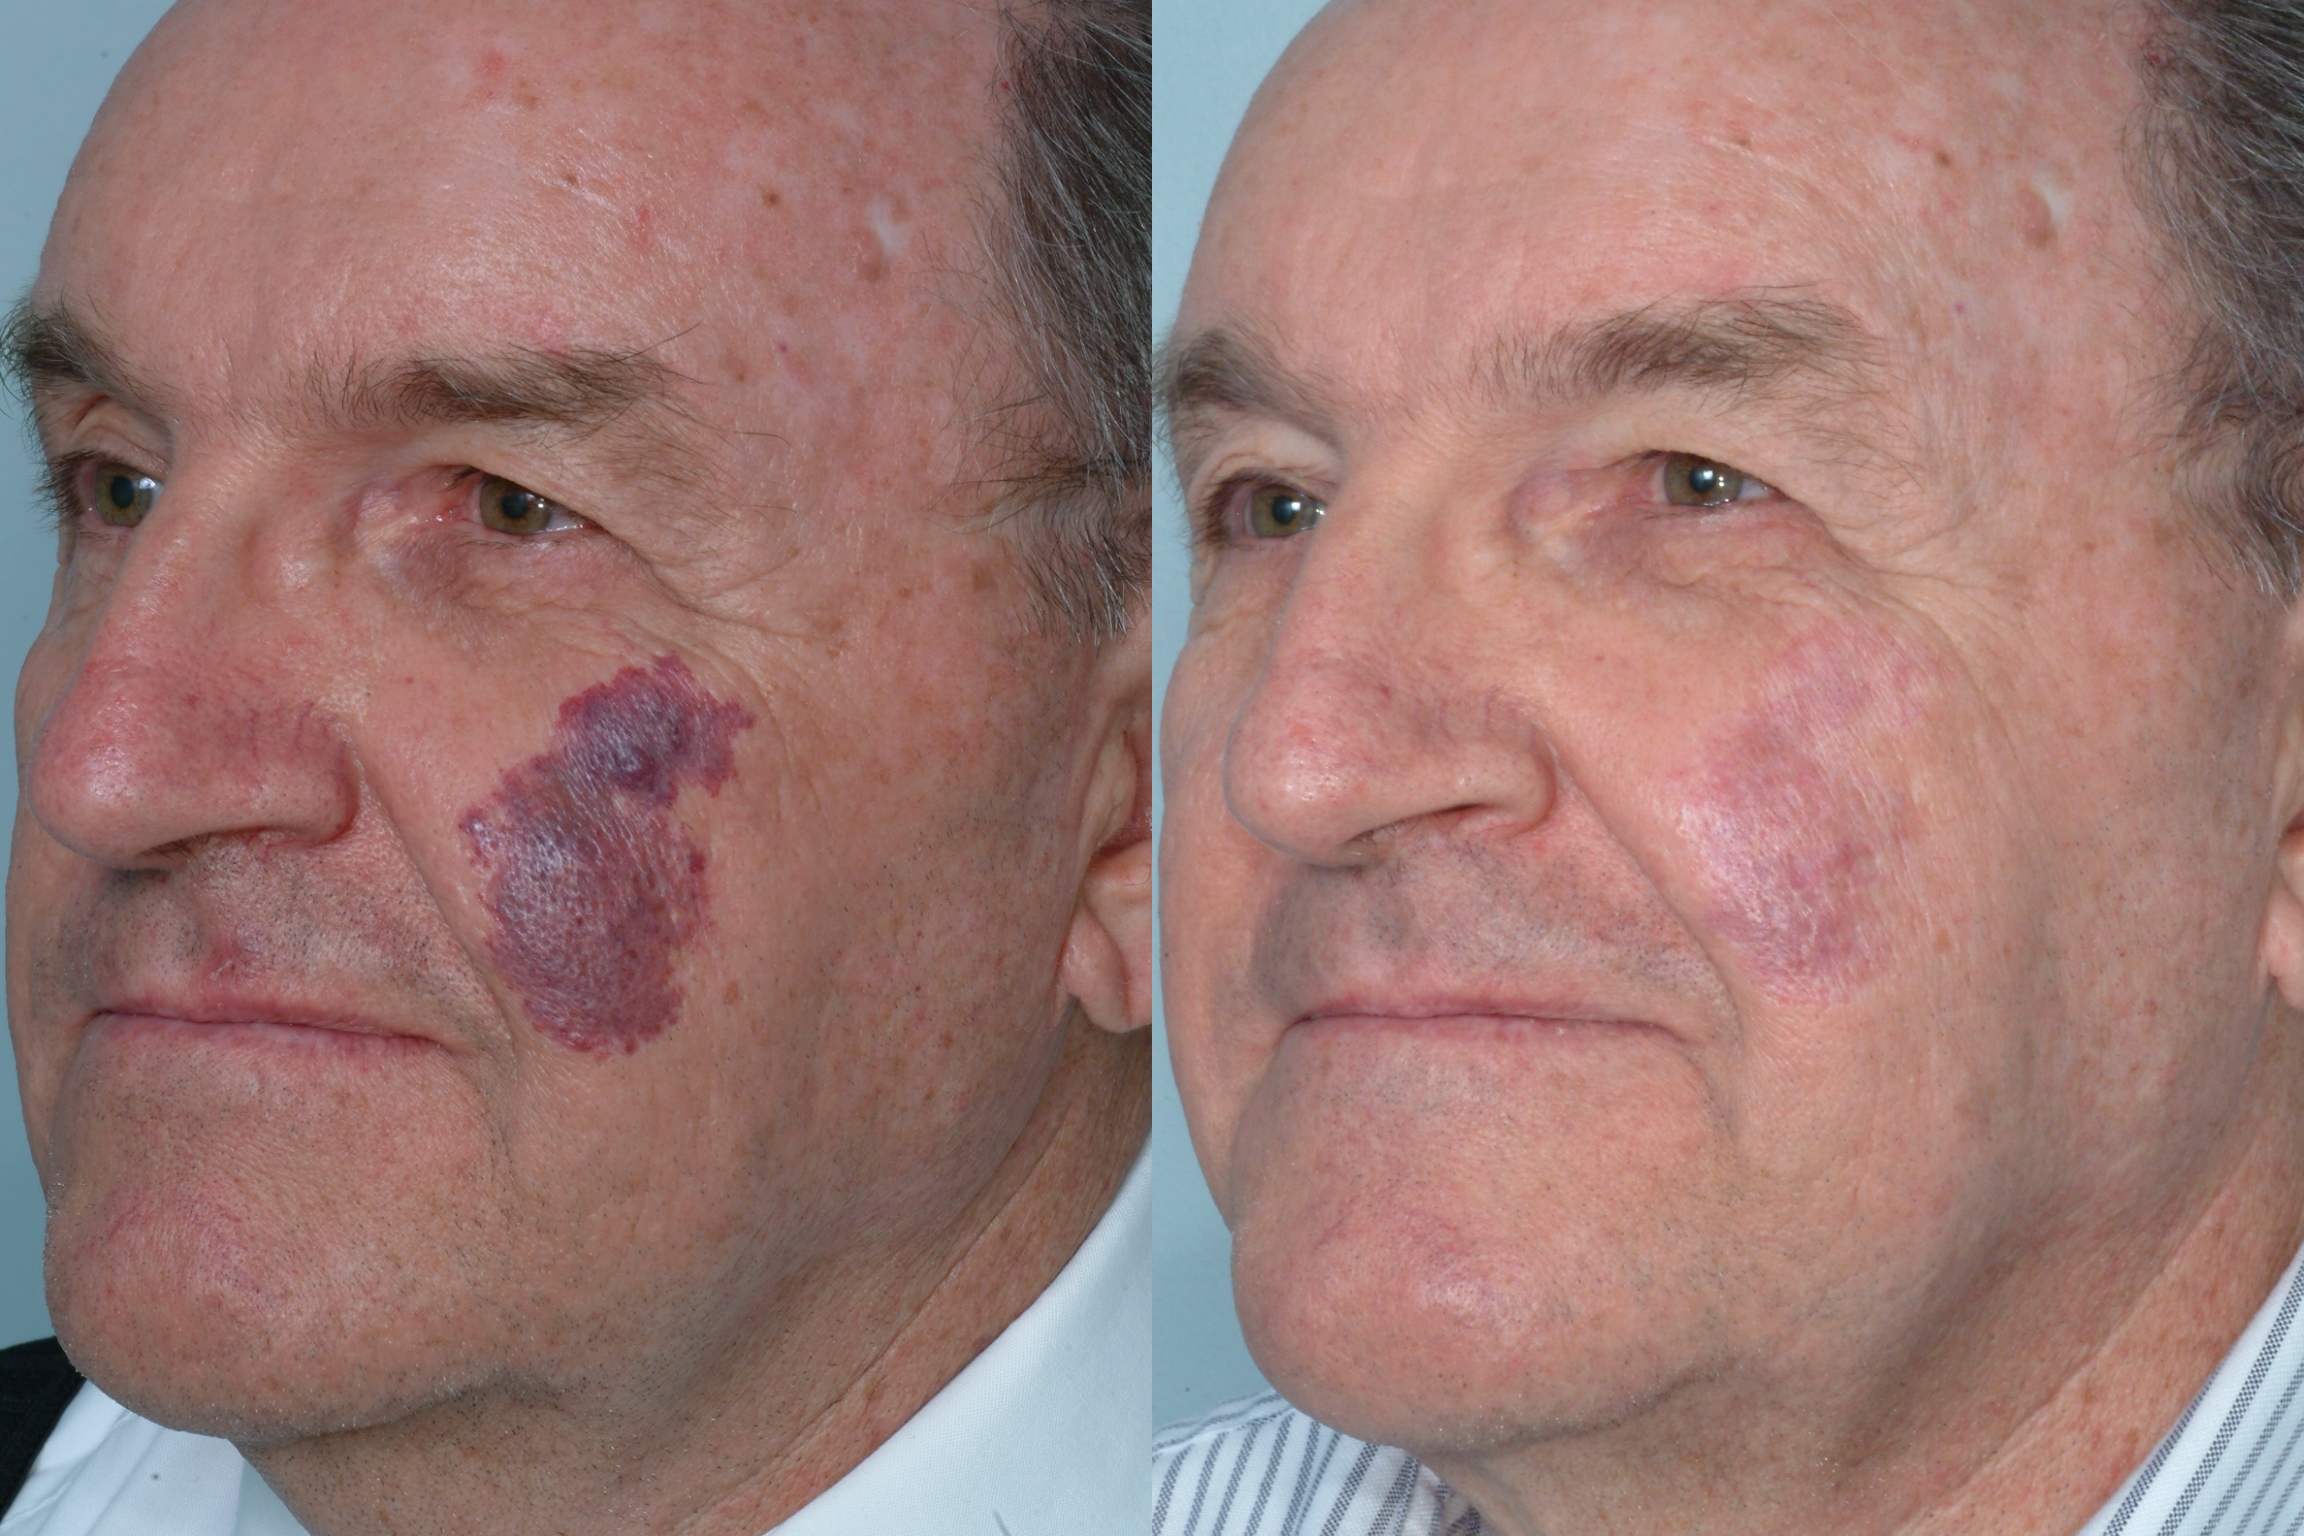 Adult hypertrophic port wine stain treated using a fractional long-pulse Nd-YAG Laser procedure invented by Dr. Mark Taylor, MD, a board certified dermatologist and owner of the Gateway Aesthetic Institute and